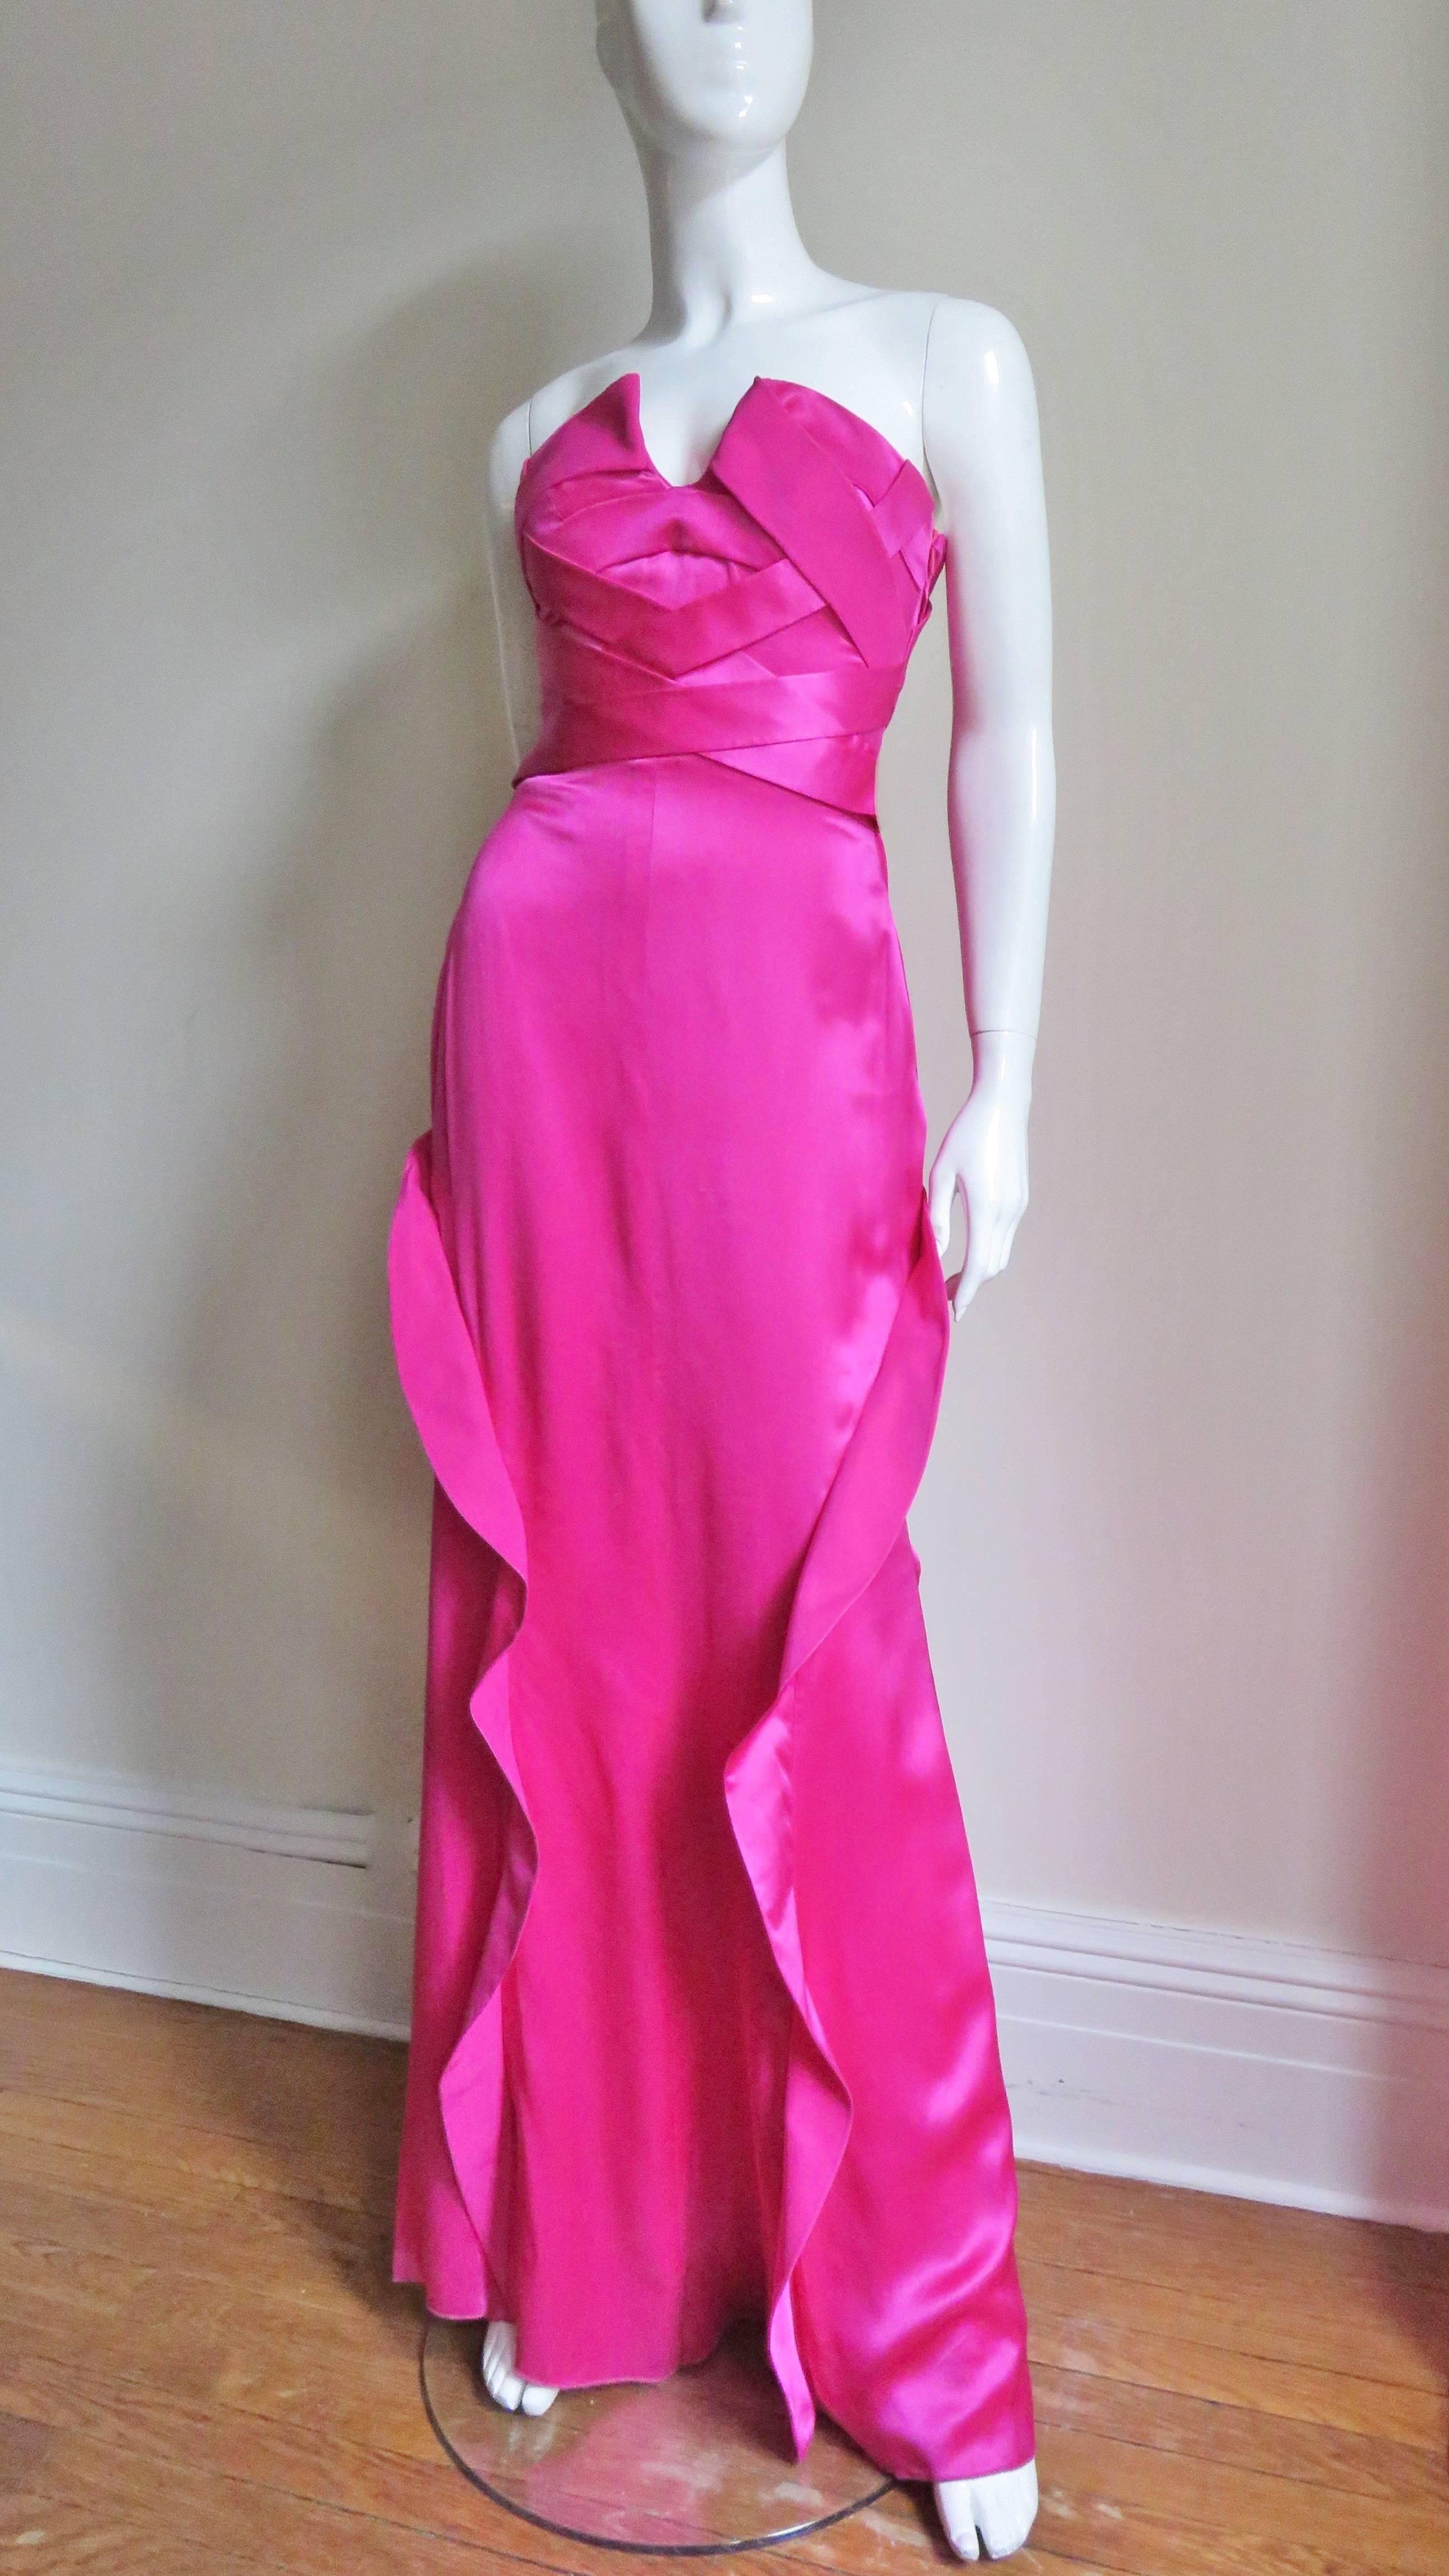 A gorgeous bright pink silk charmeuse strapless gown from Versace.  It has a fitted folding over at the bust with a center front plunge and bands criss crossing the front and back to the waist leaving a cutout below in the back.  The skirt portion